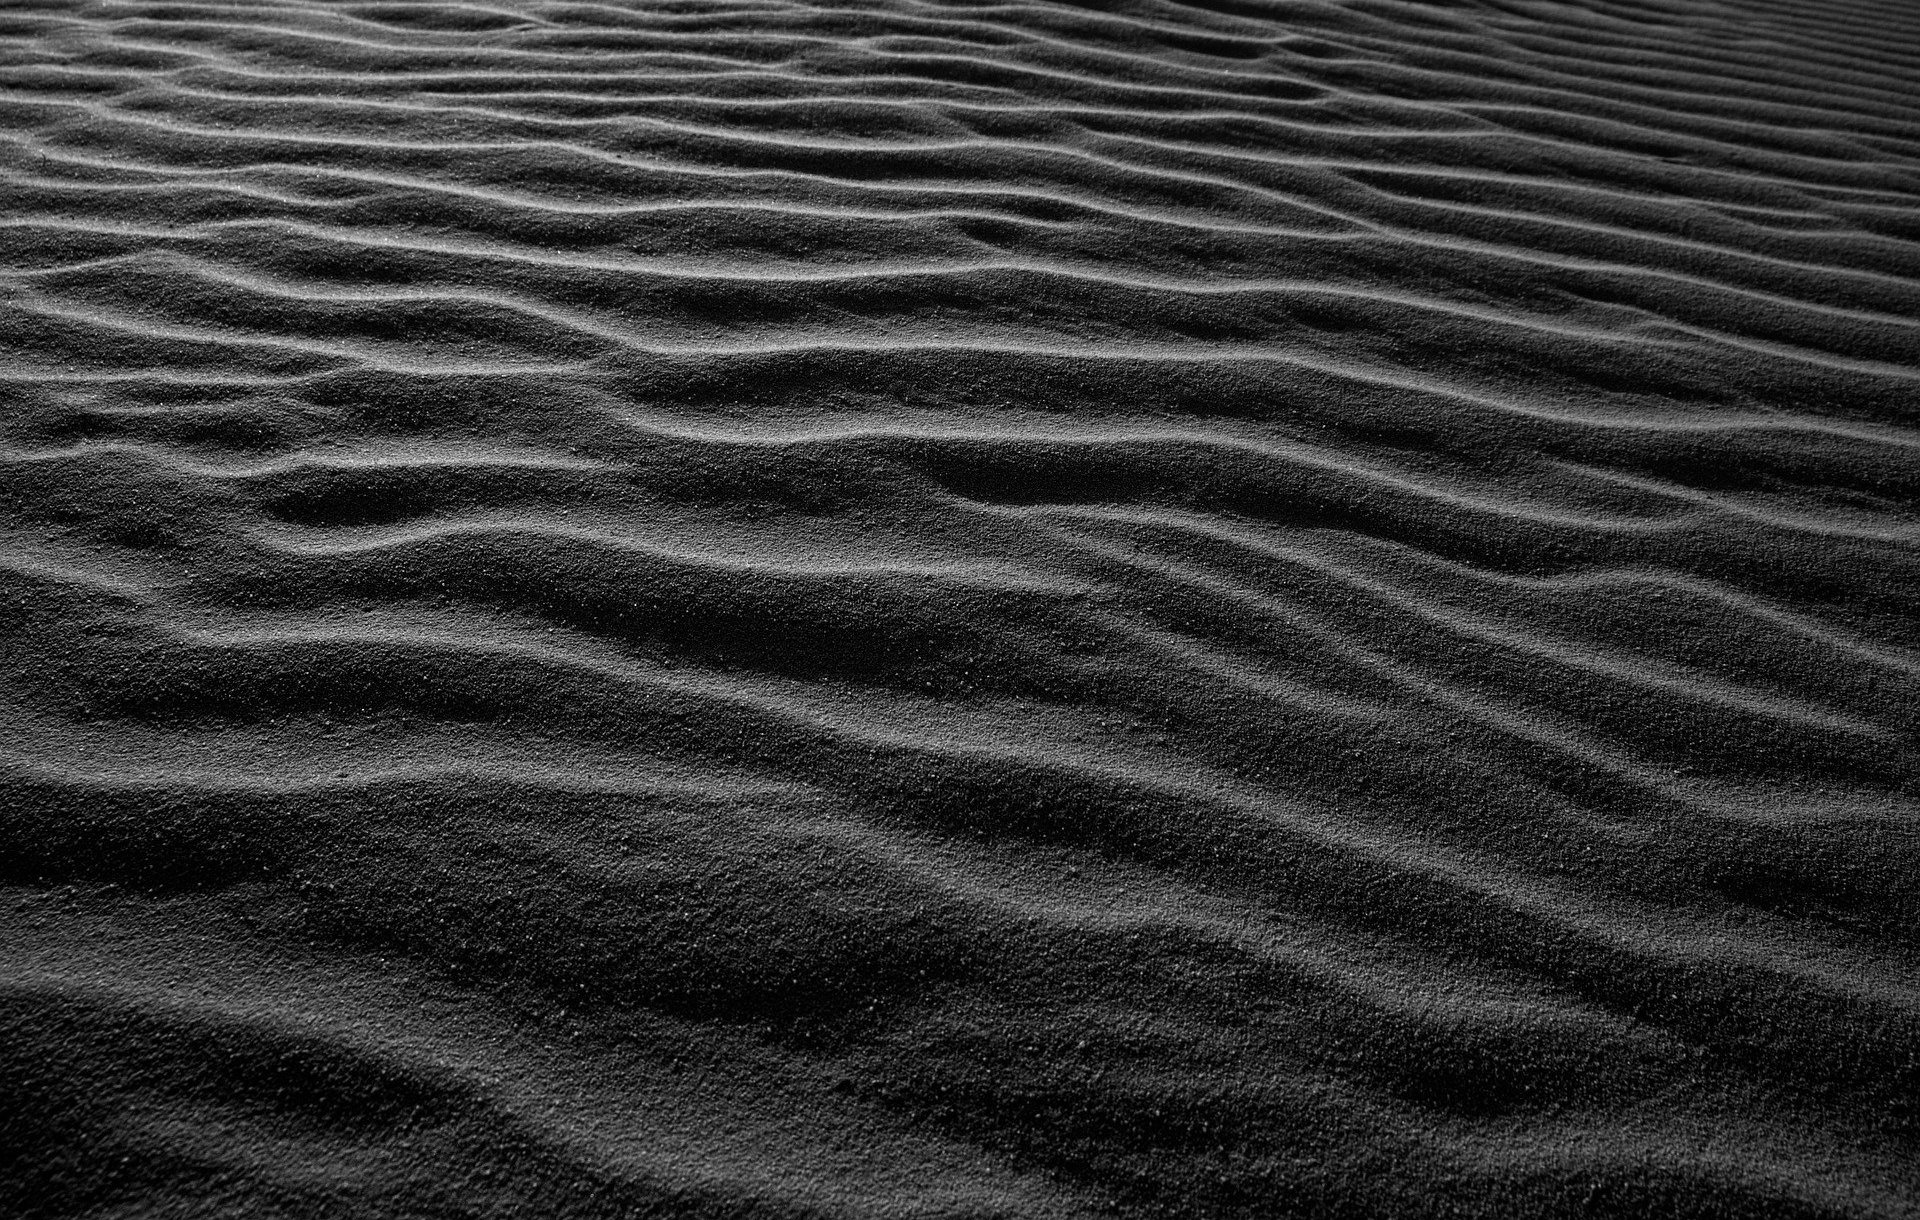 Photo of sanddunes at night. Moonlight reflects off the sand, which appears black.